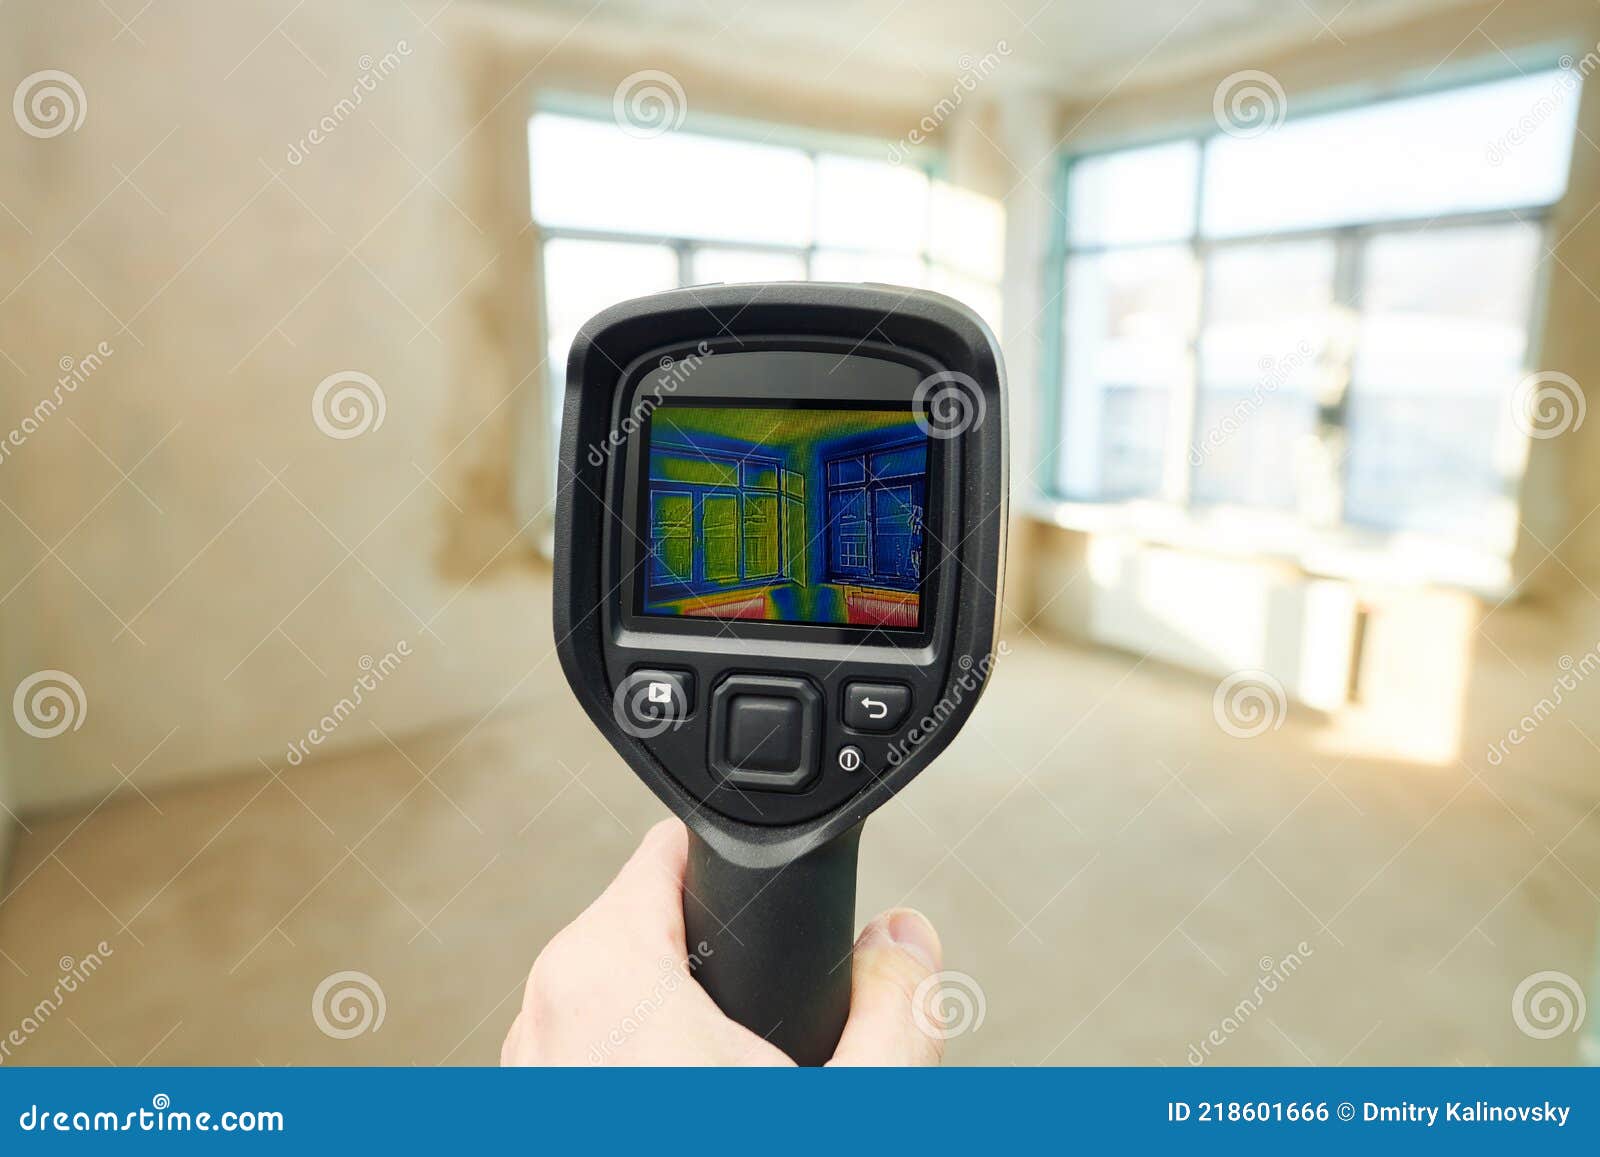 https://thumbs.dreamstime.com/z/thermal-imaging-camera-inspection-window-building-check-heat-loss-thermal-imaging-camera-window-inspection-construction-218601666.jpg